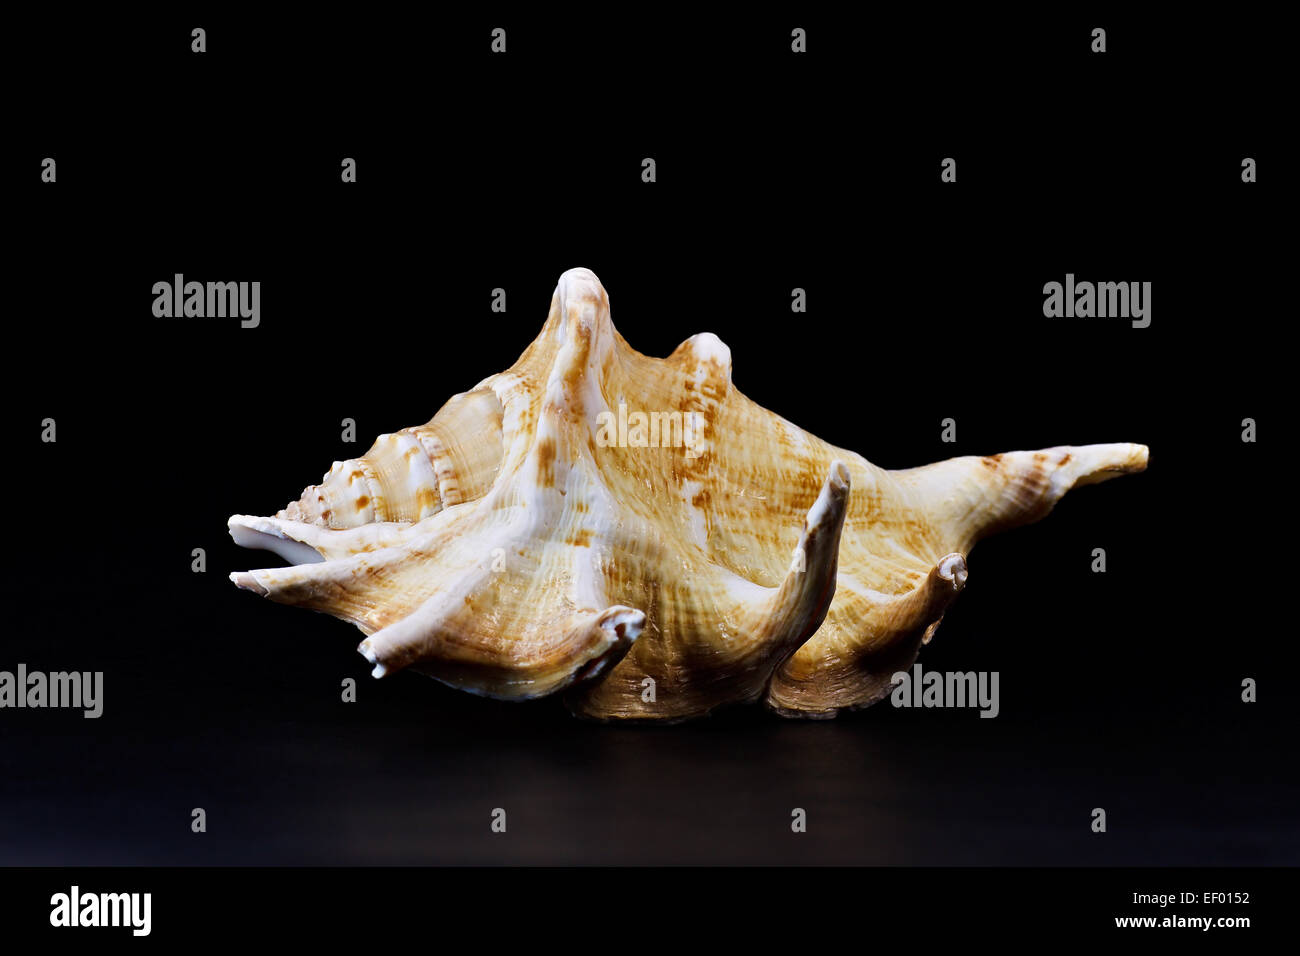 A shell on a black background. Stock Photo